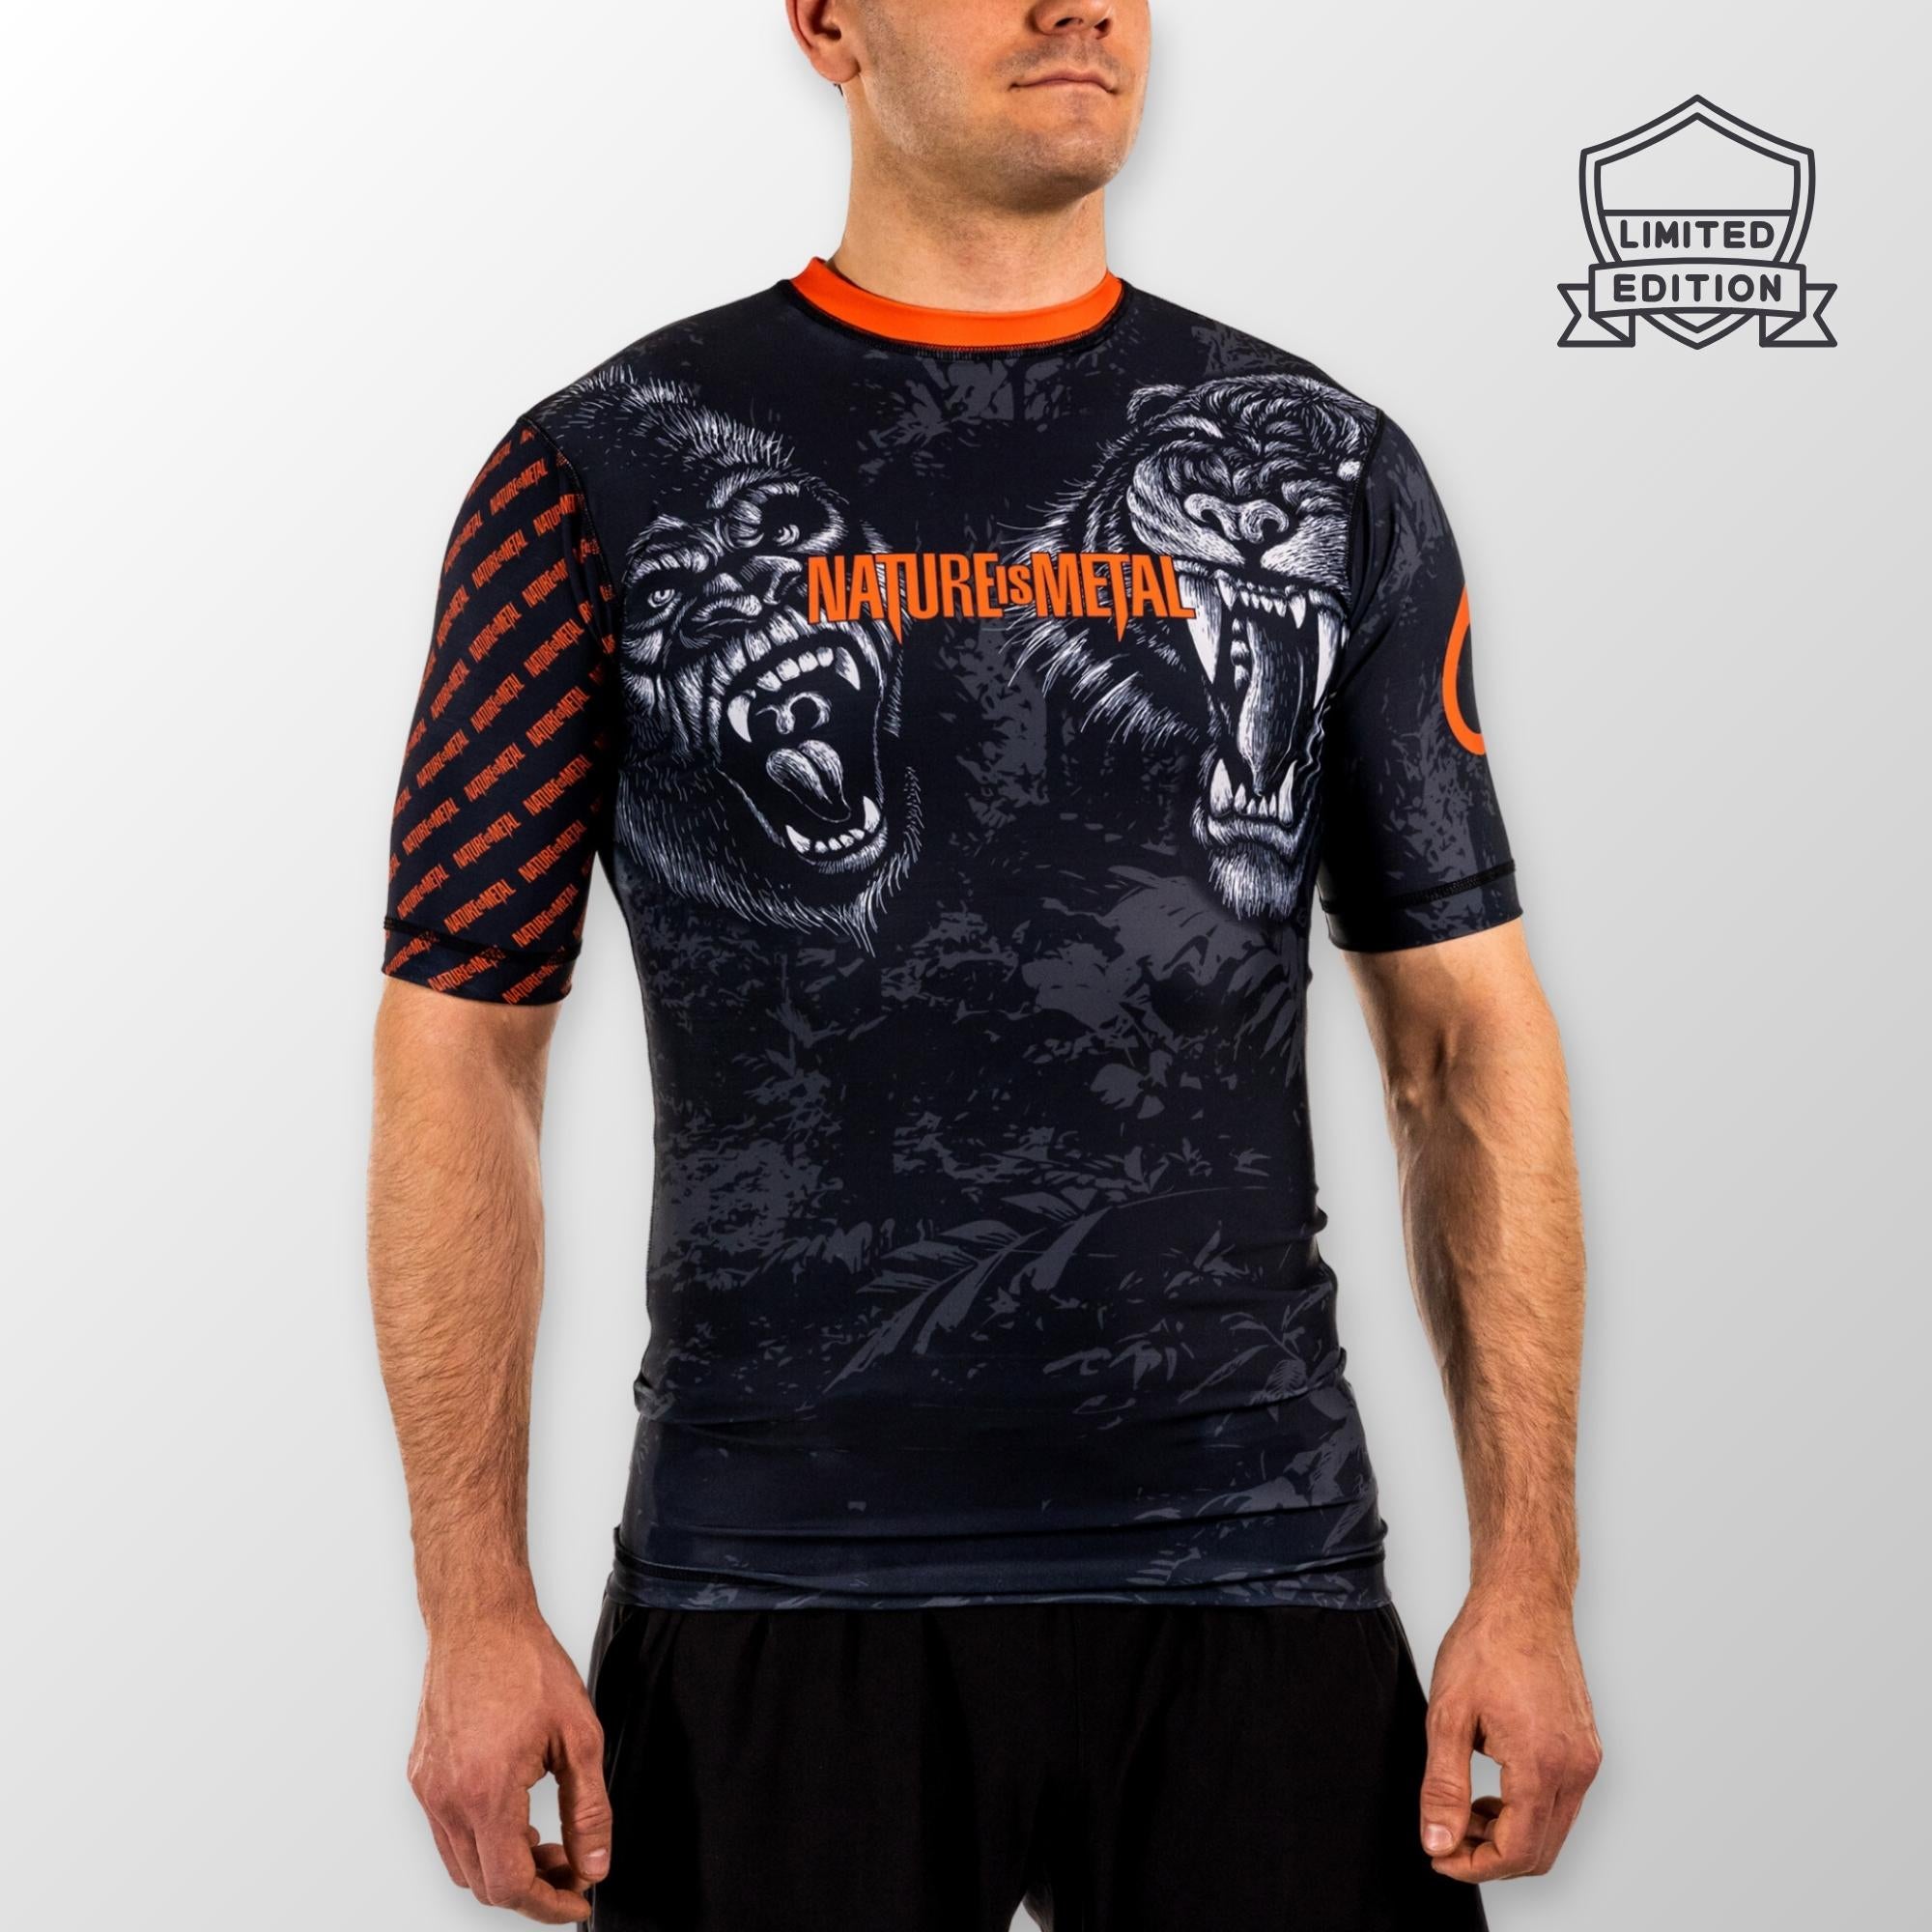 Nature is Metal x Origin - Fangs Out Rashguard - Compression Fit Short Sleeve